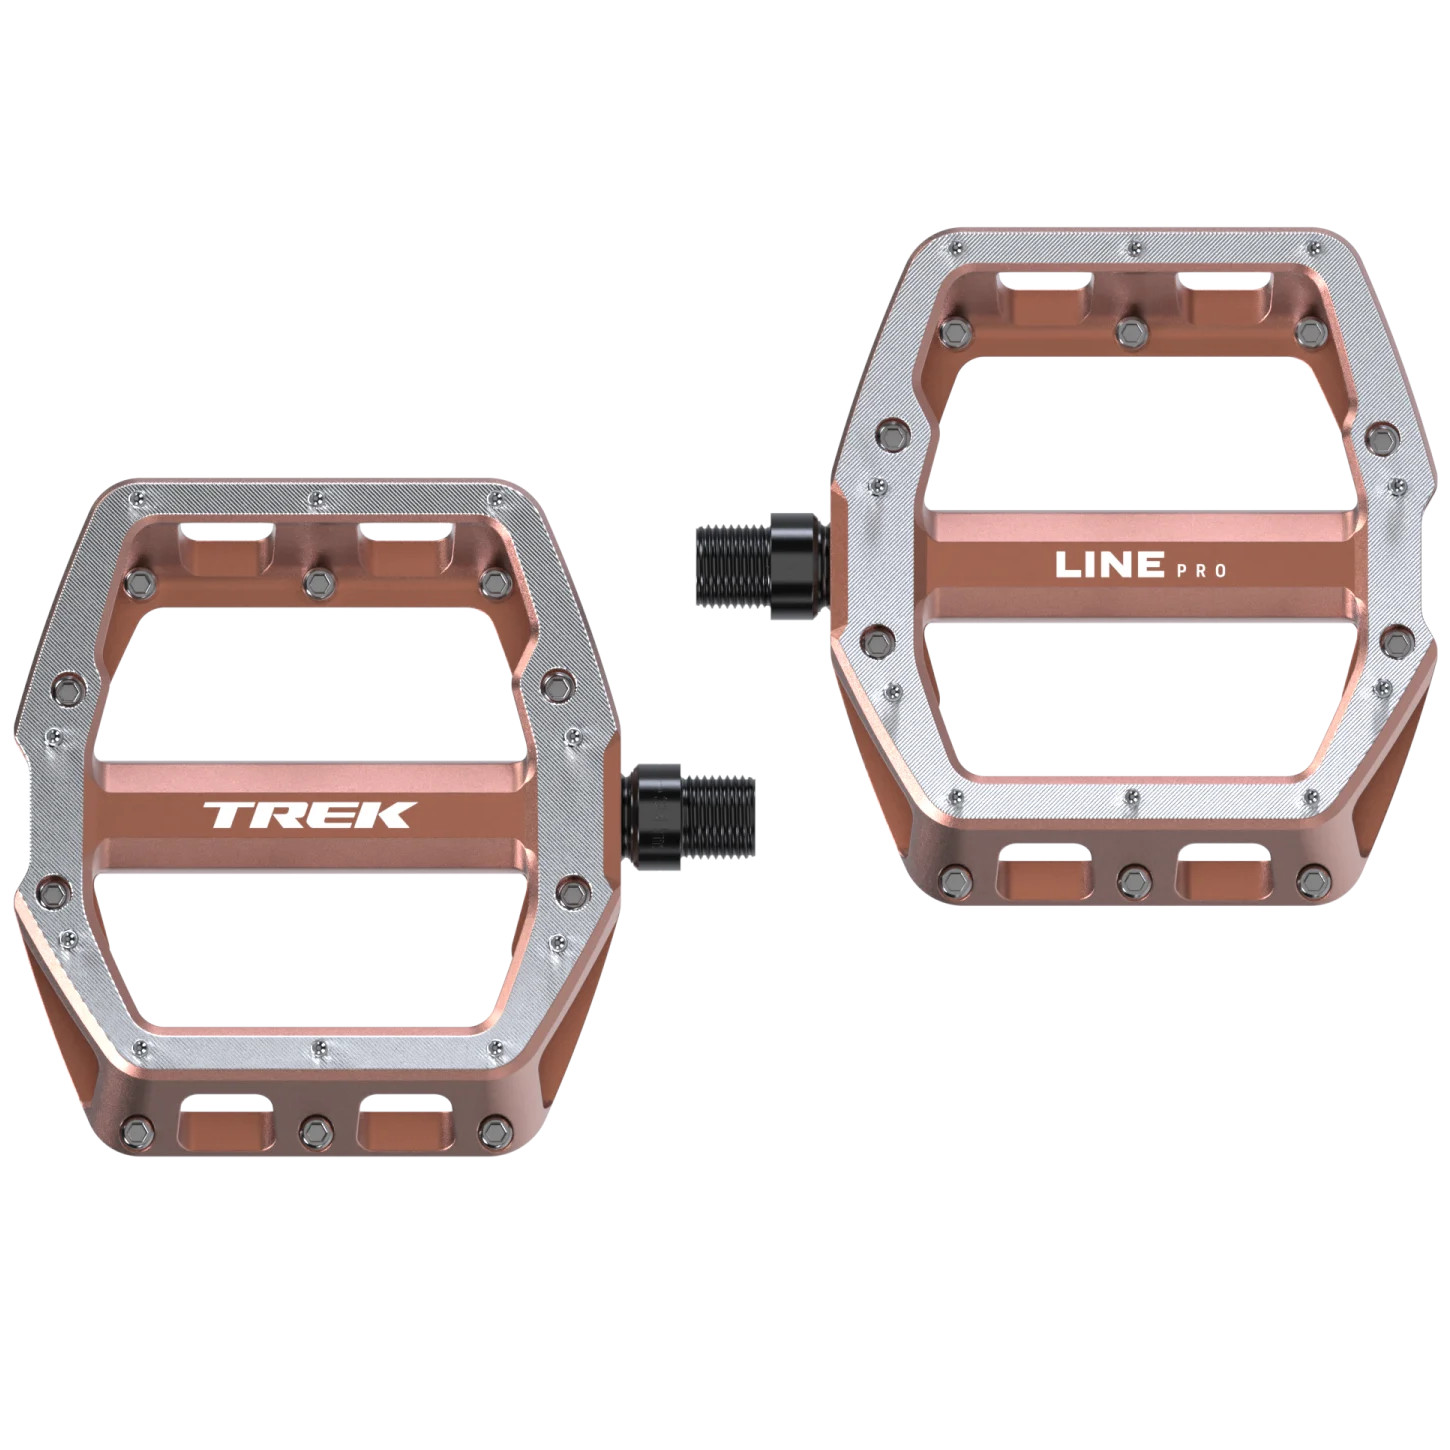 Picture of Trek Line Pro Flat Pedal - pennyflake